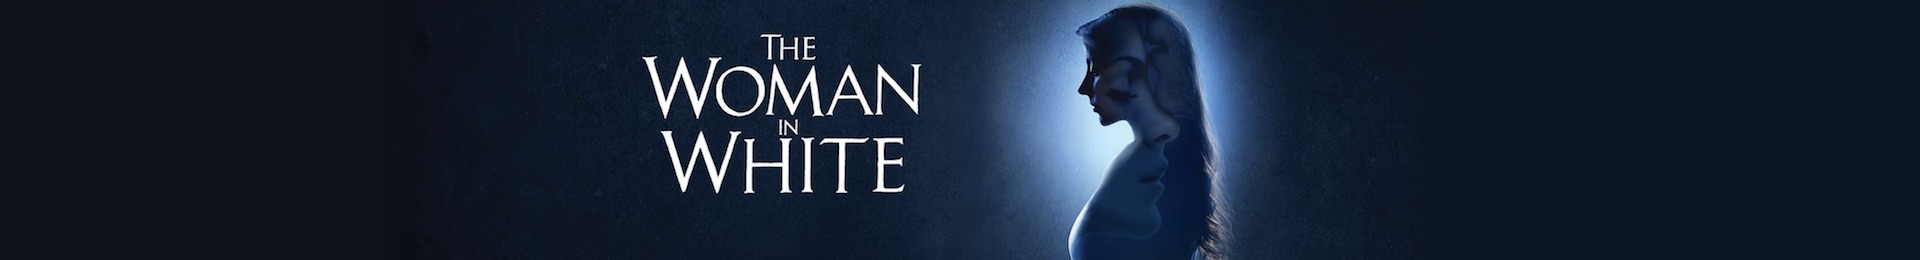 The Woman in White banner image